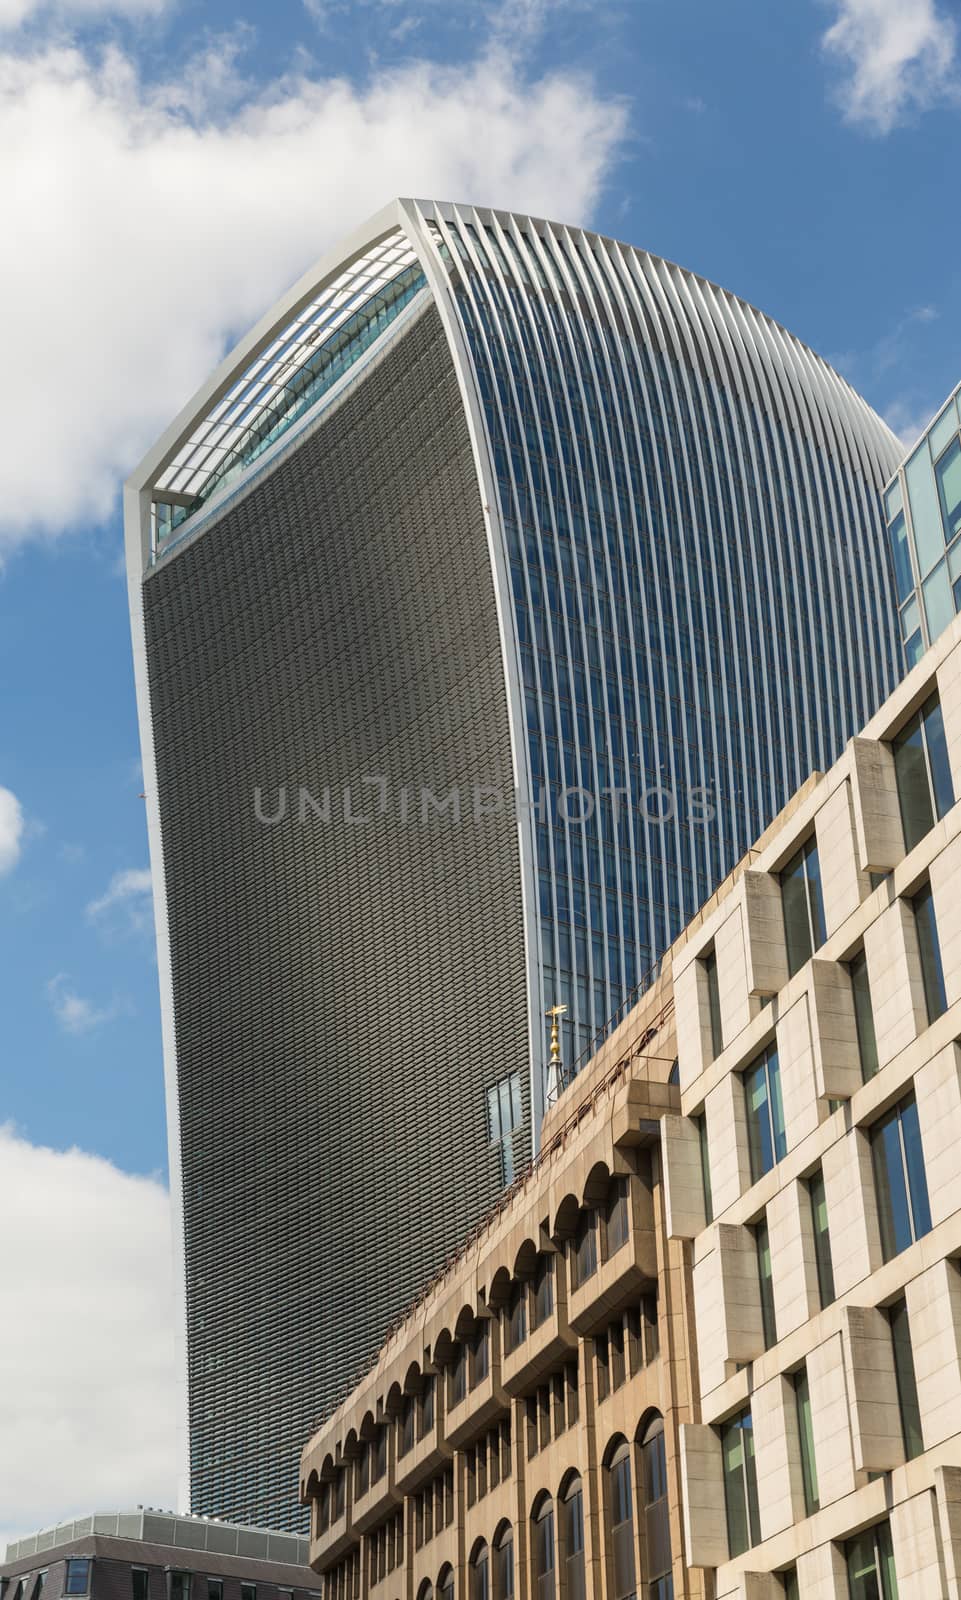 Business and Financial District of London - tall curved building stands above more regular office buildings